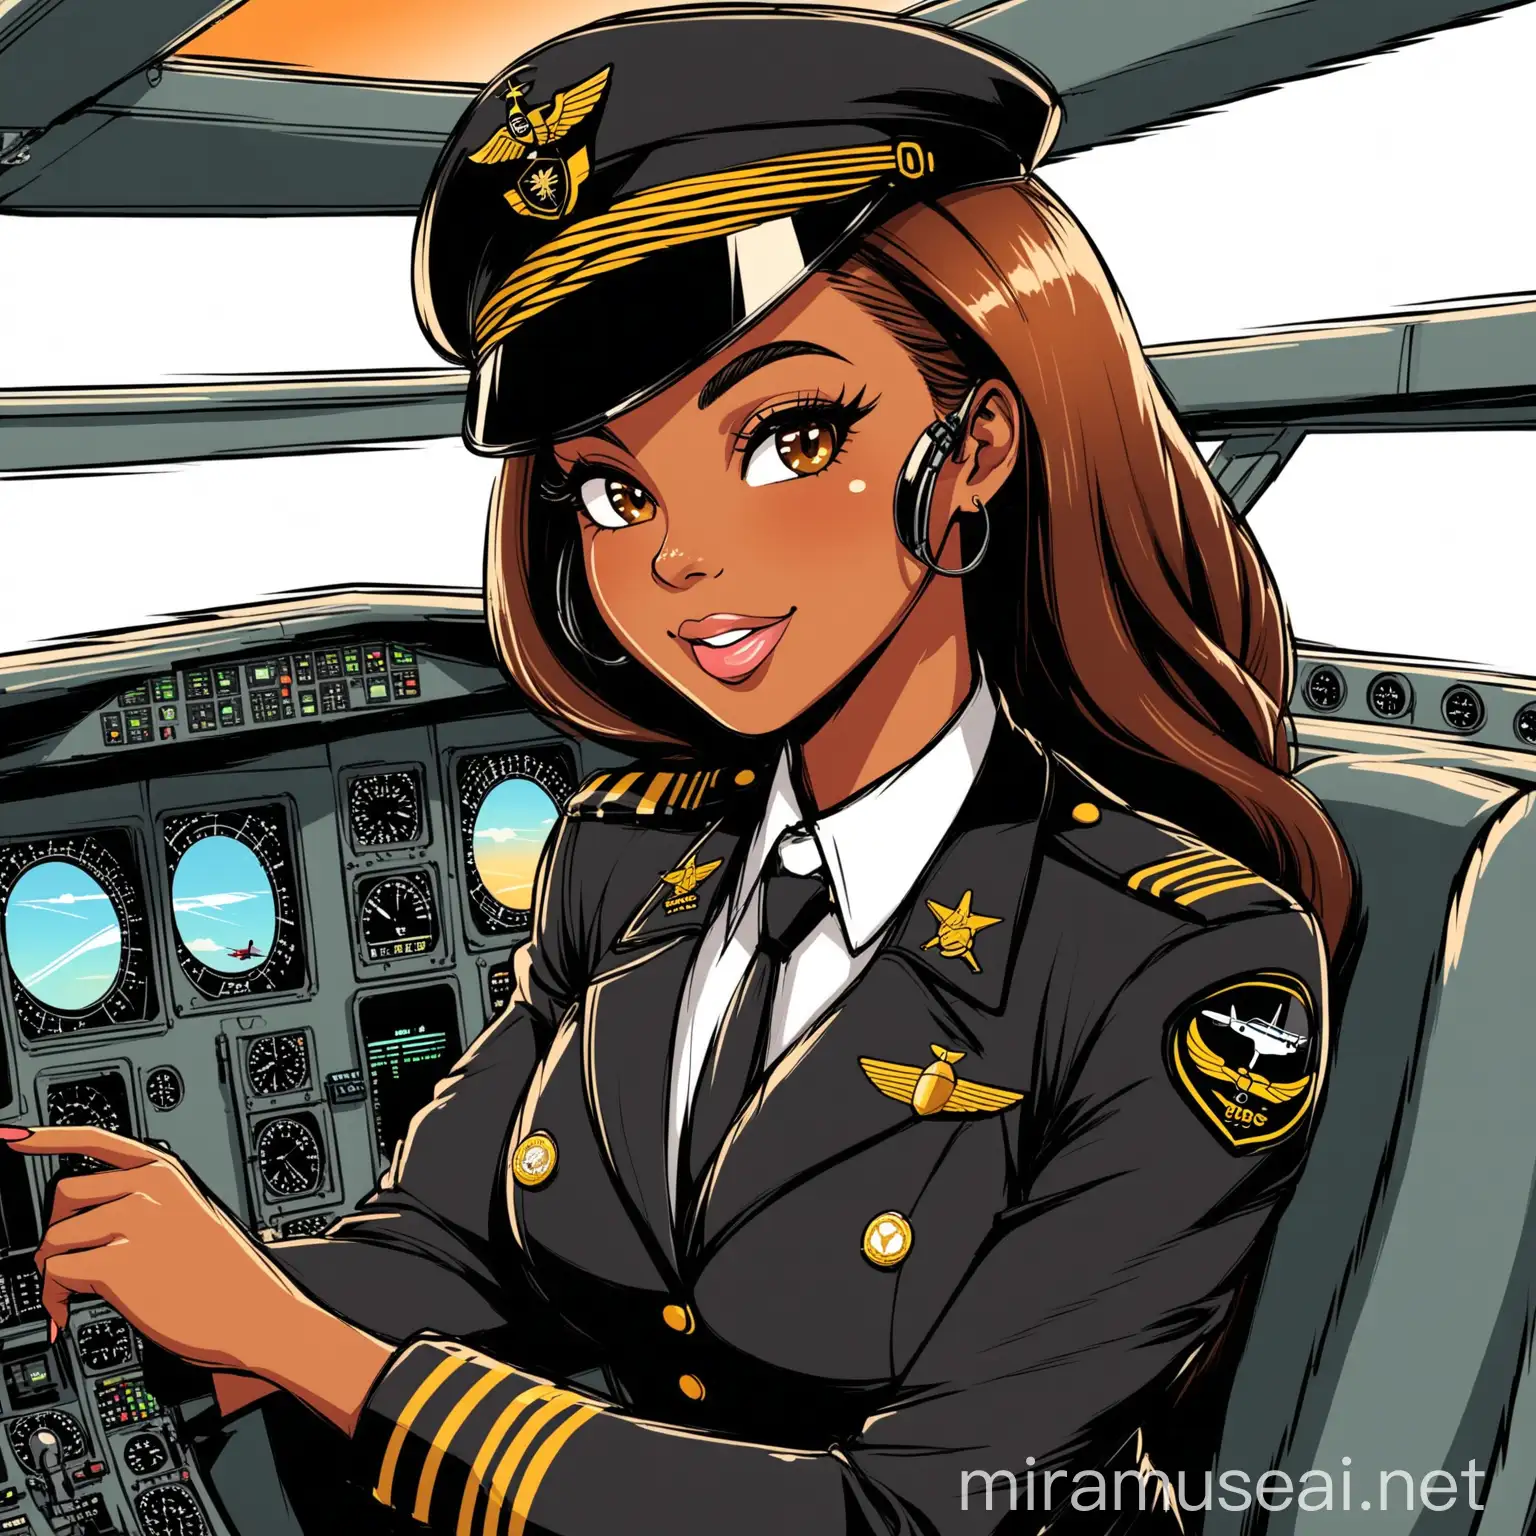 Cartoony color:
A beautiful
Black woman she is a pilot, Boss babe, dressed in pilot uniform, she is cockpit flying a plane for a airline 